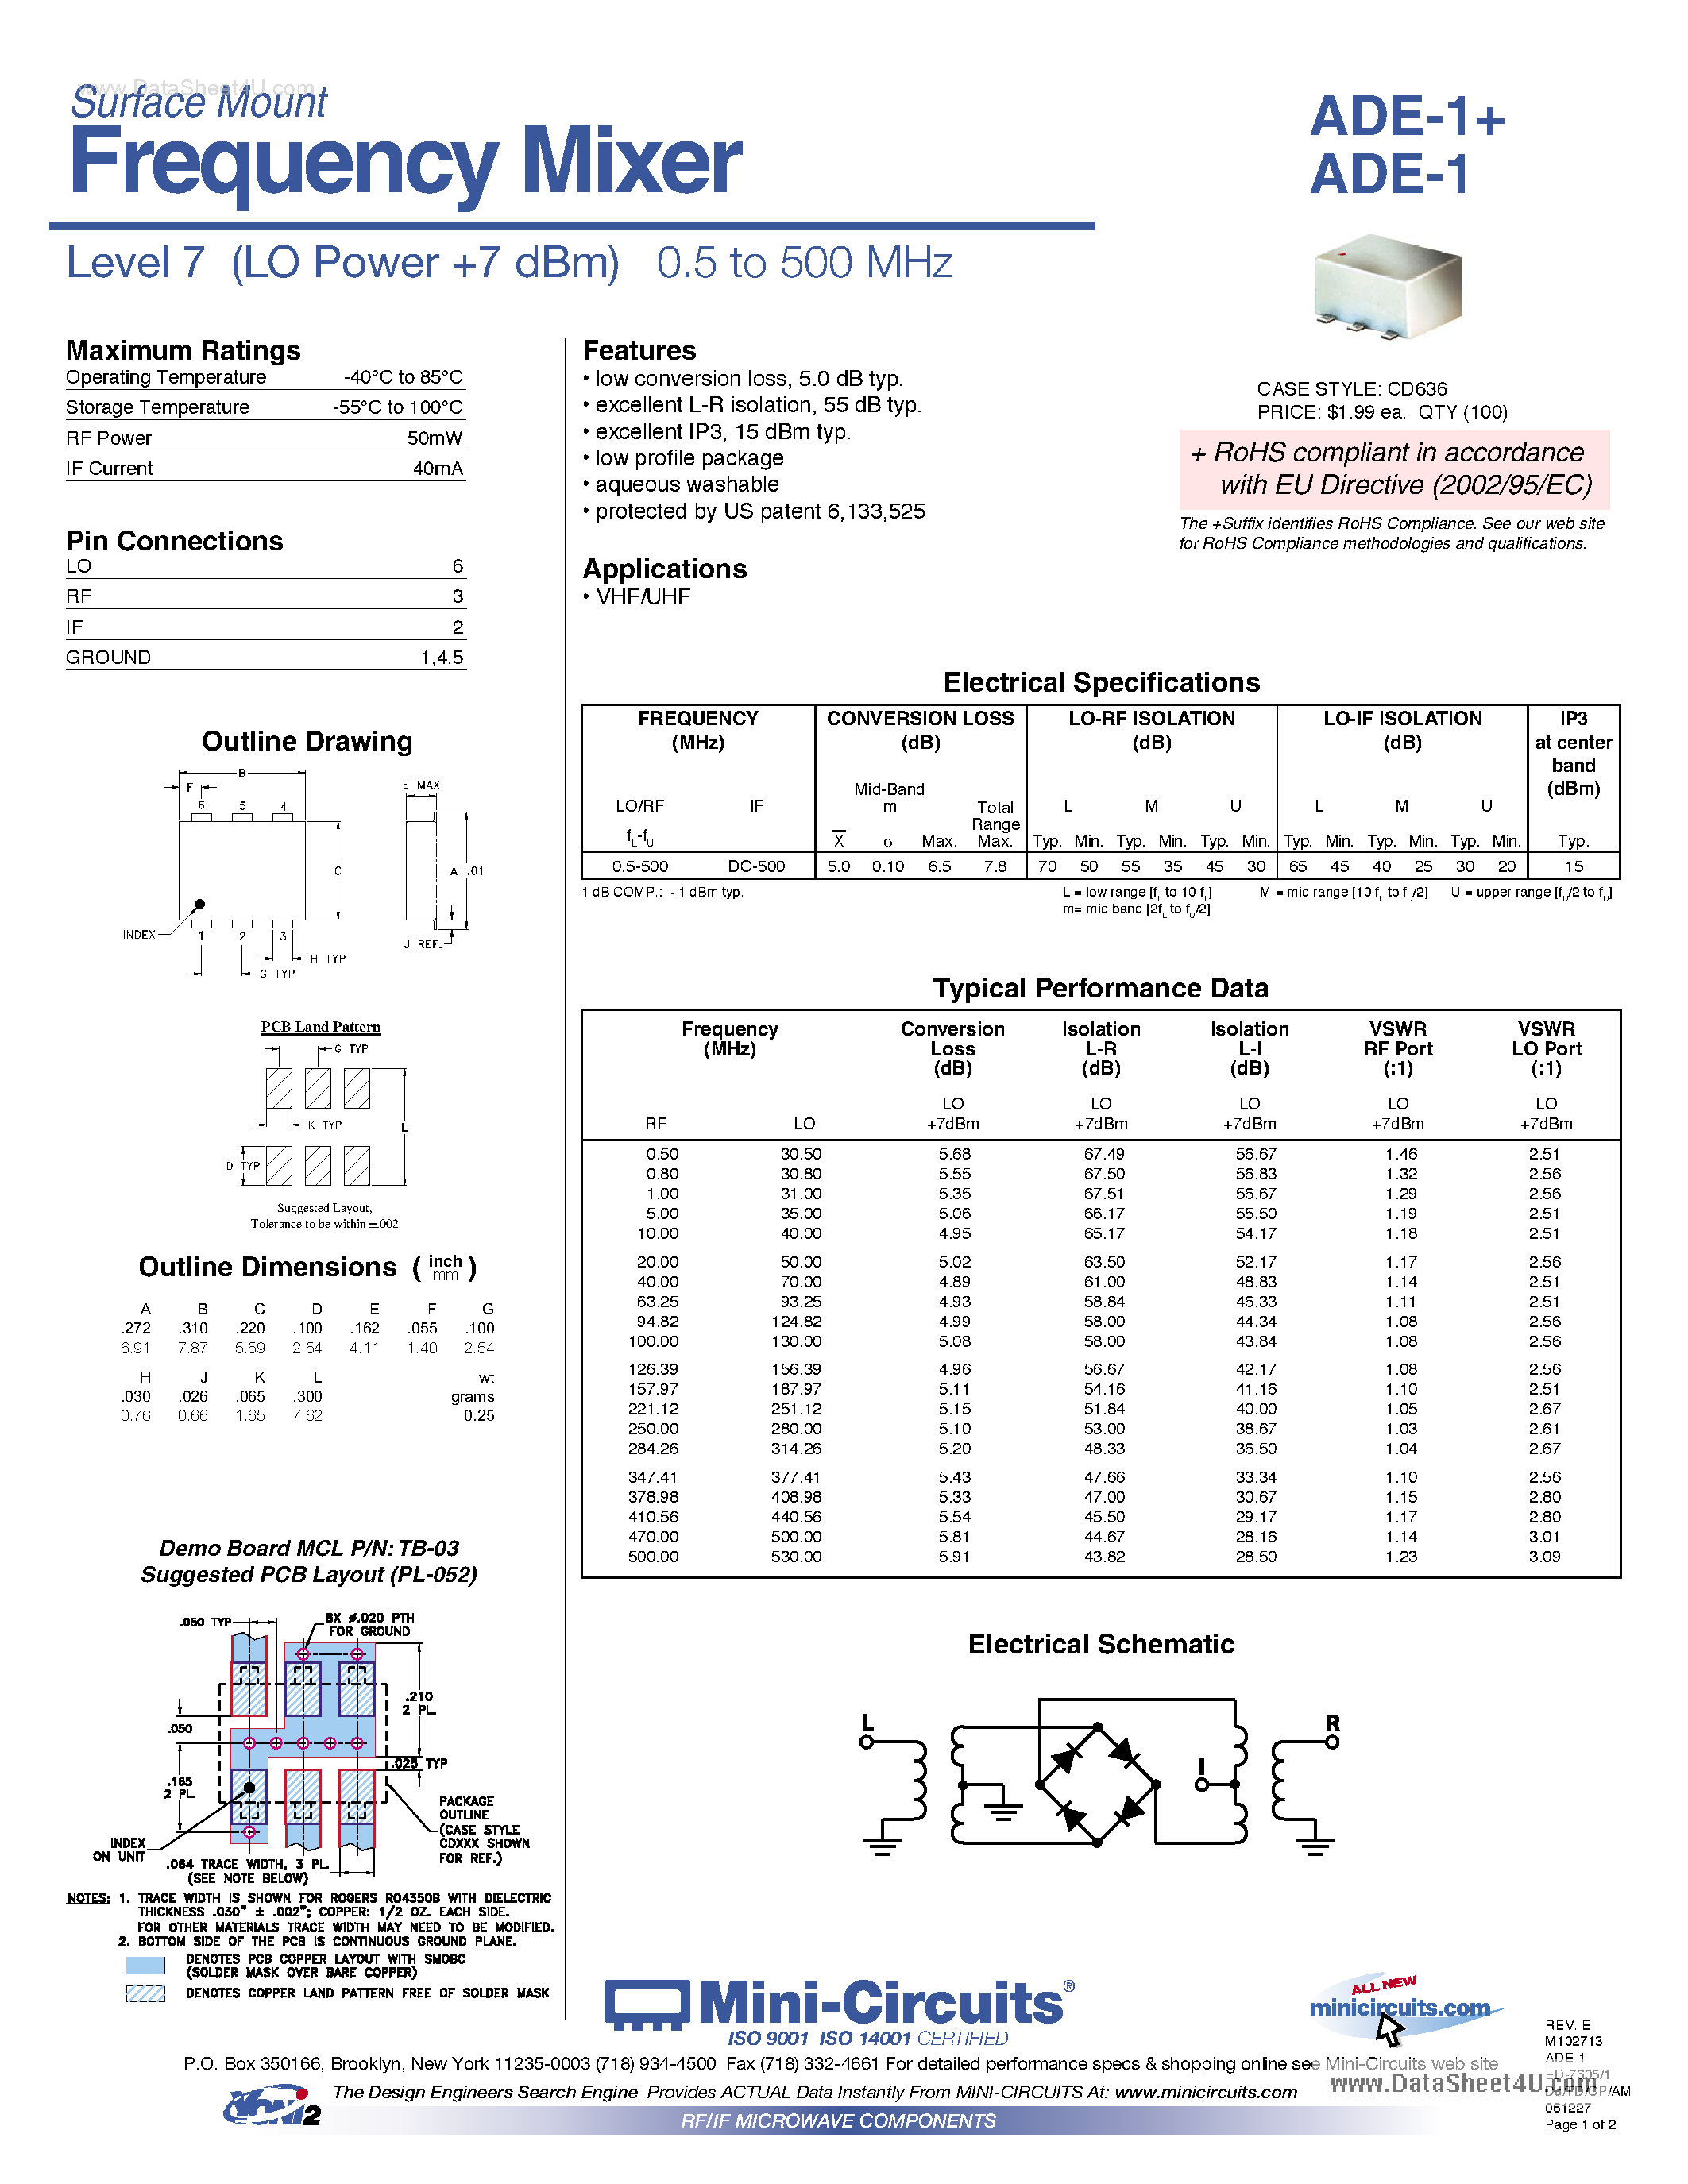 Datasheet ADE-1 - Frequency Mixer page 1